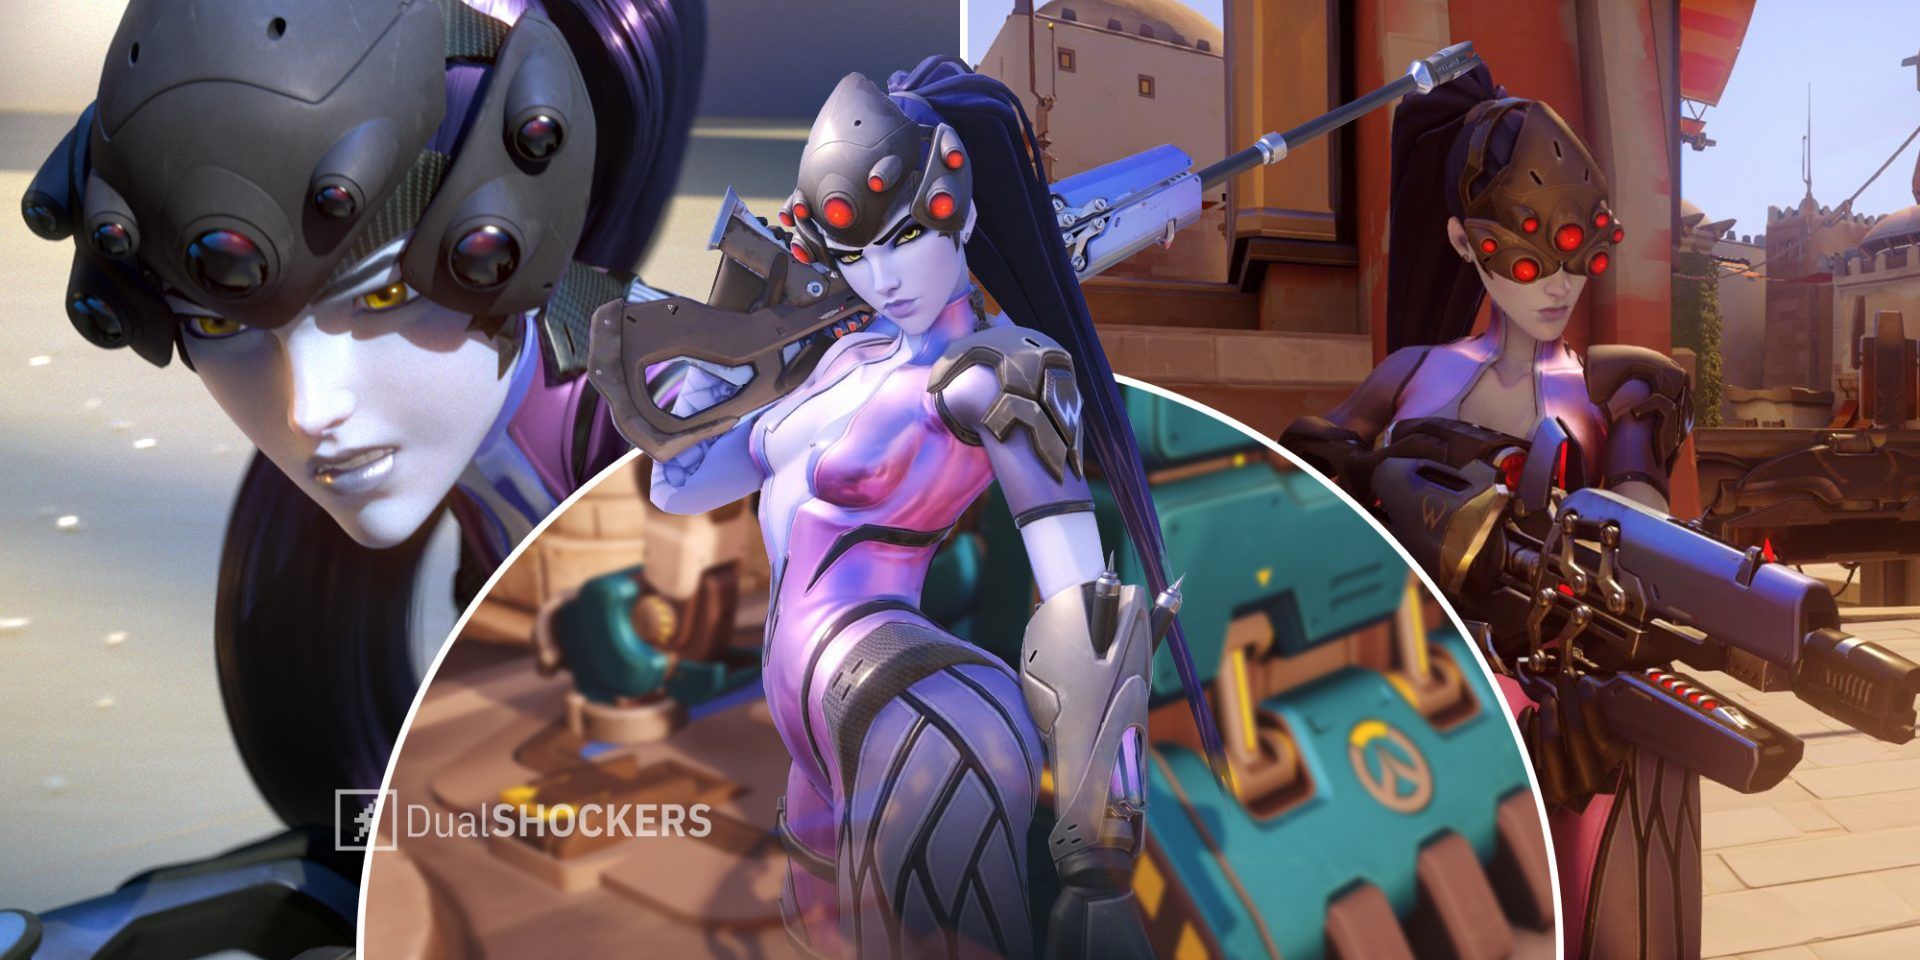 Overwatch 2 Widowmaker on left, Widowmaker with sniper rifle in middle, Widowmaker with goggles on right